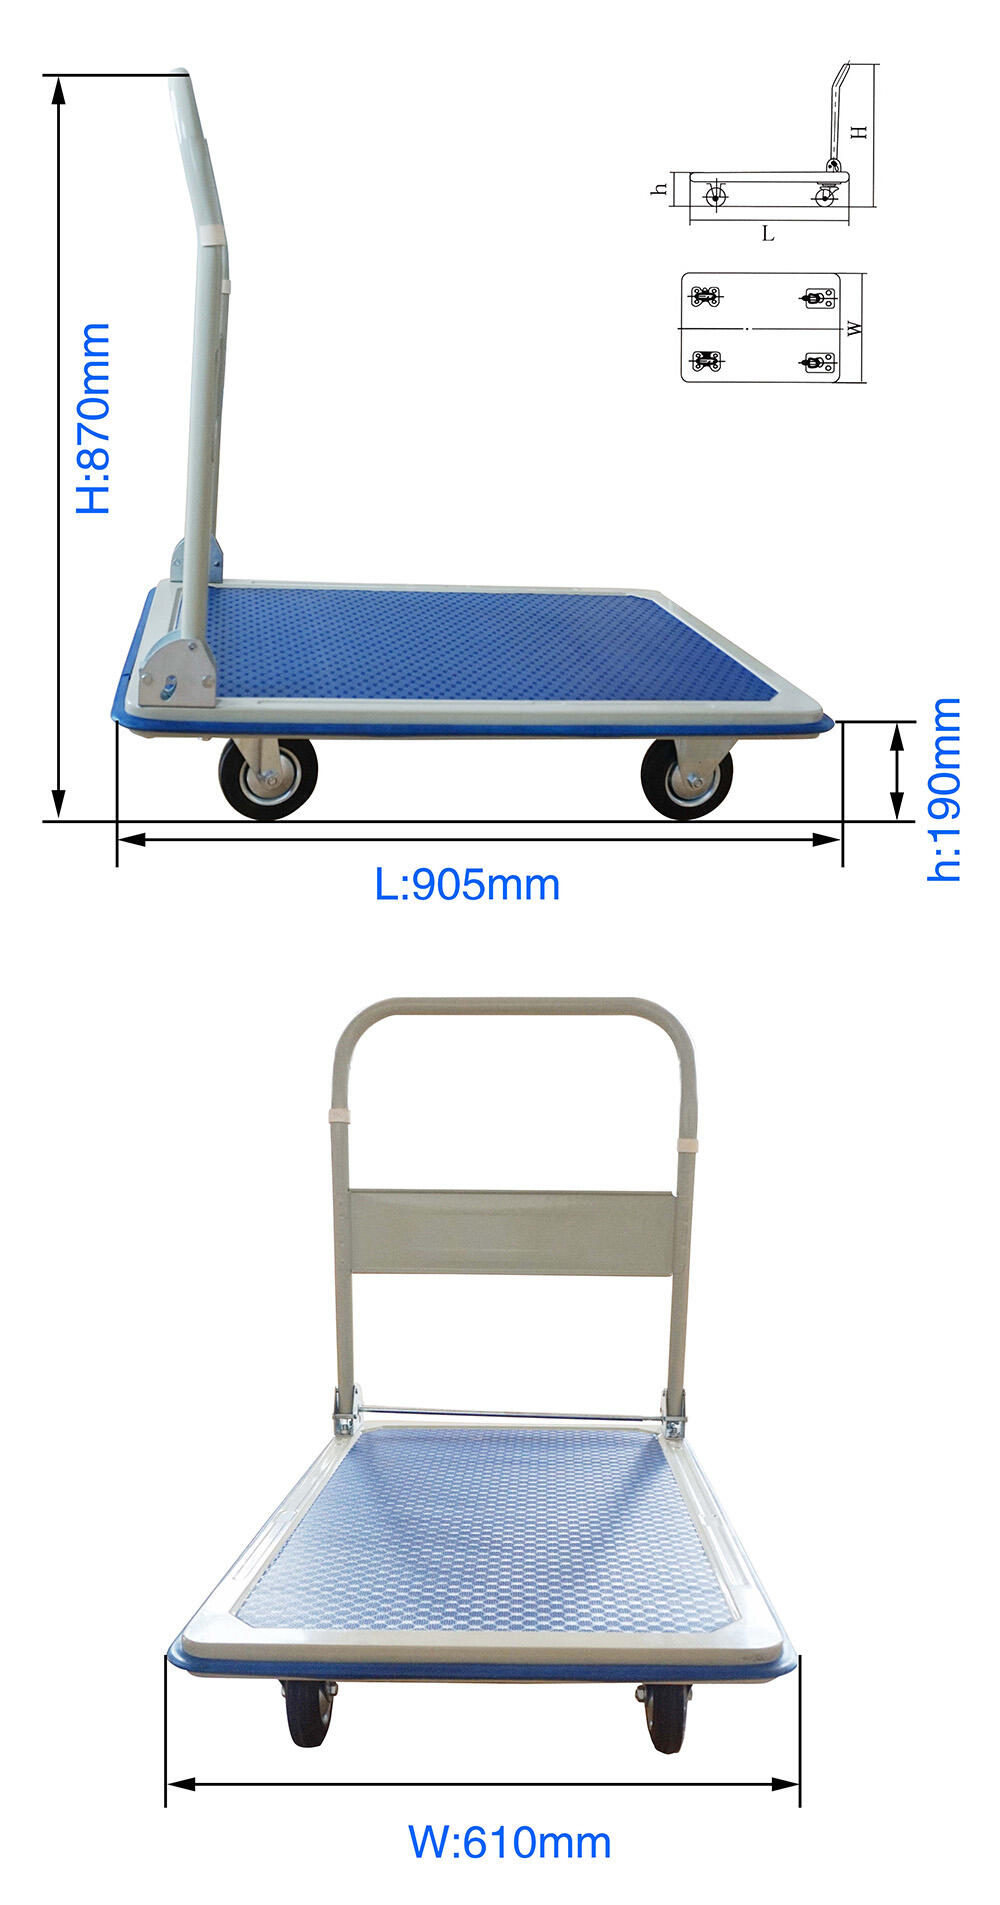 PH300 Platform Hand Truck, Folding Push Hand Dolly Cart for Loading and Storage, with 5" Caster Wheel, 300kg Load Capacity manufacture